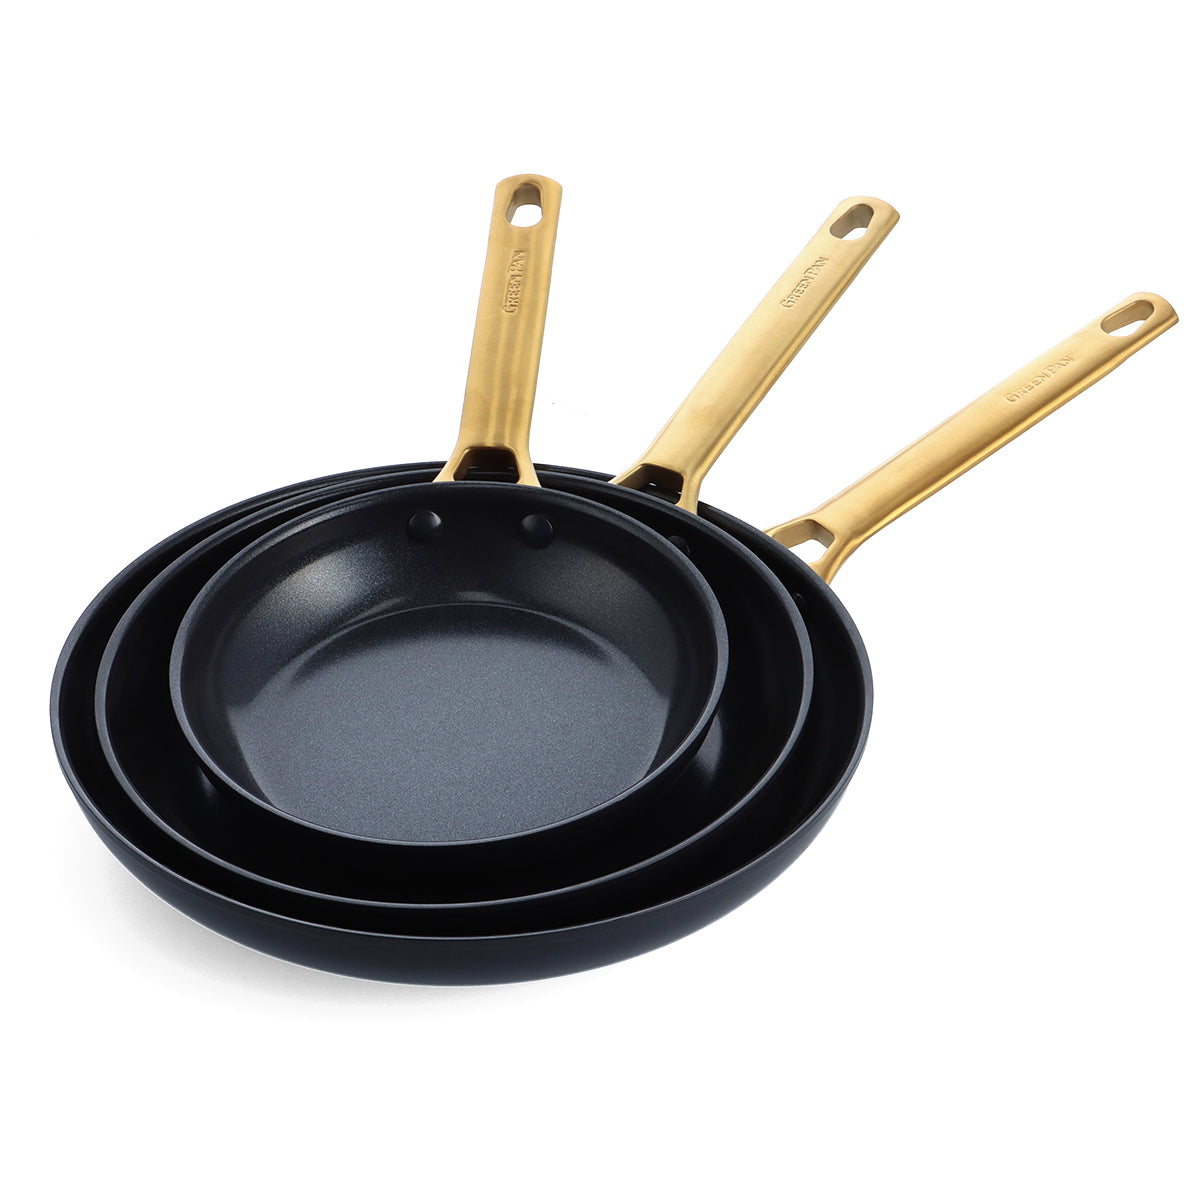 Reserve Ceramic Nonstick 8", 9.5" and 11" Frypan Set | Black with Gold Tone Handles